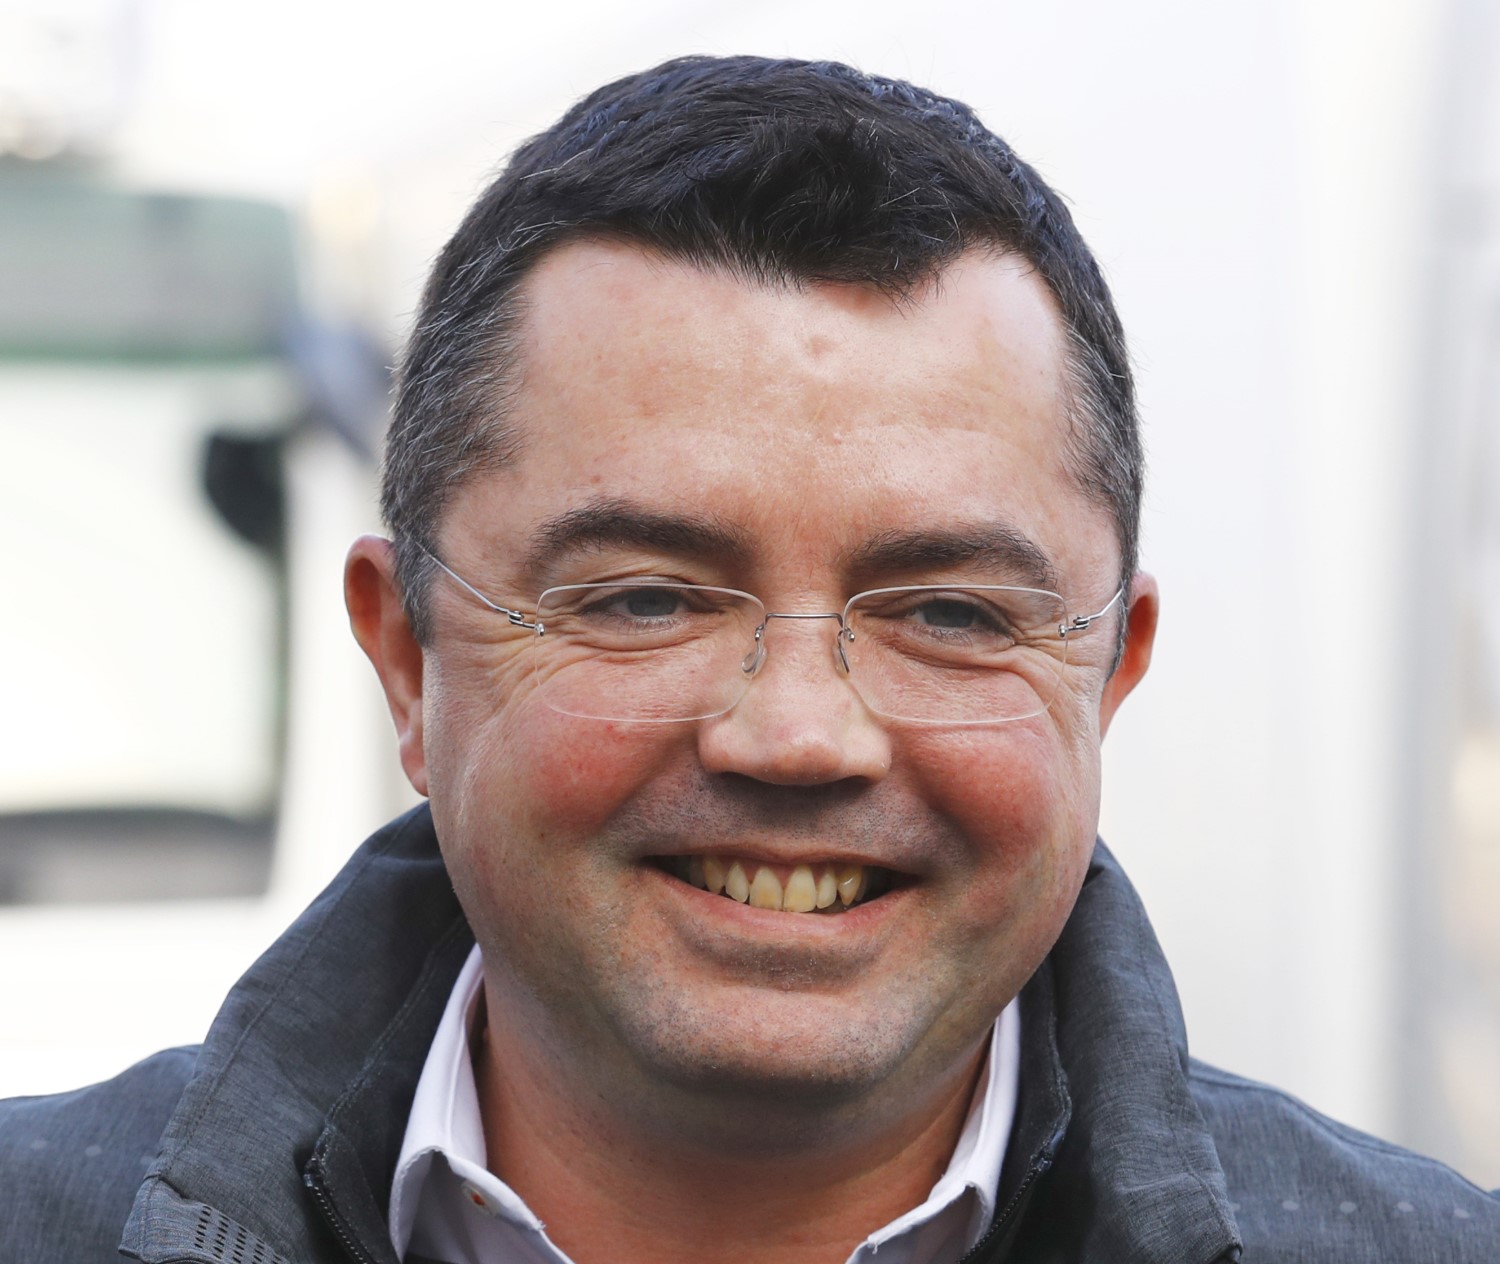 Eric Boullier knows the sophisticated F1 power units drive up costs, bring no new fans to the sports, and create a larger gap between the haves and the have-nots.